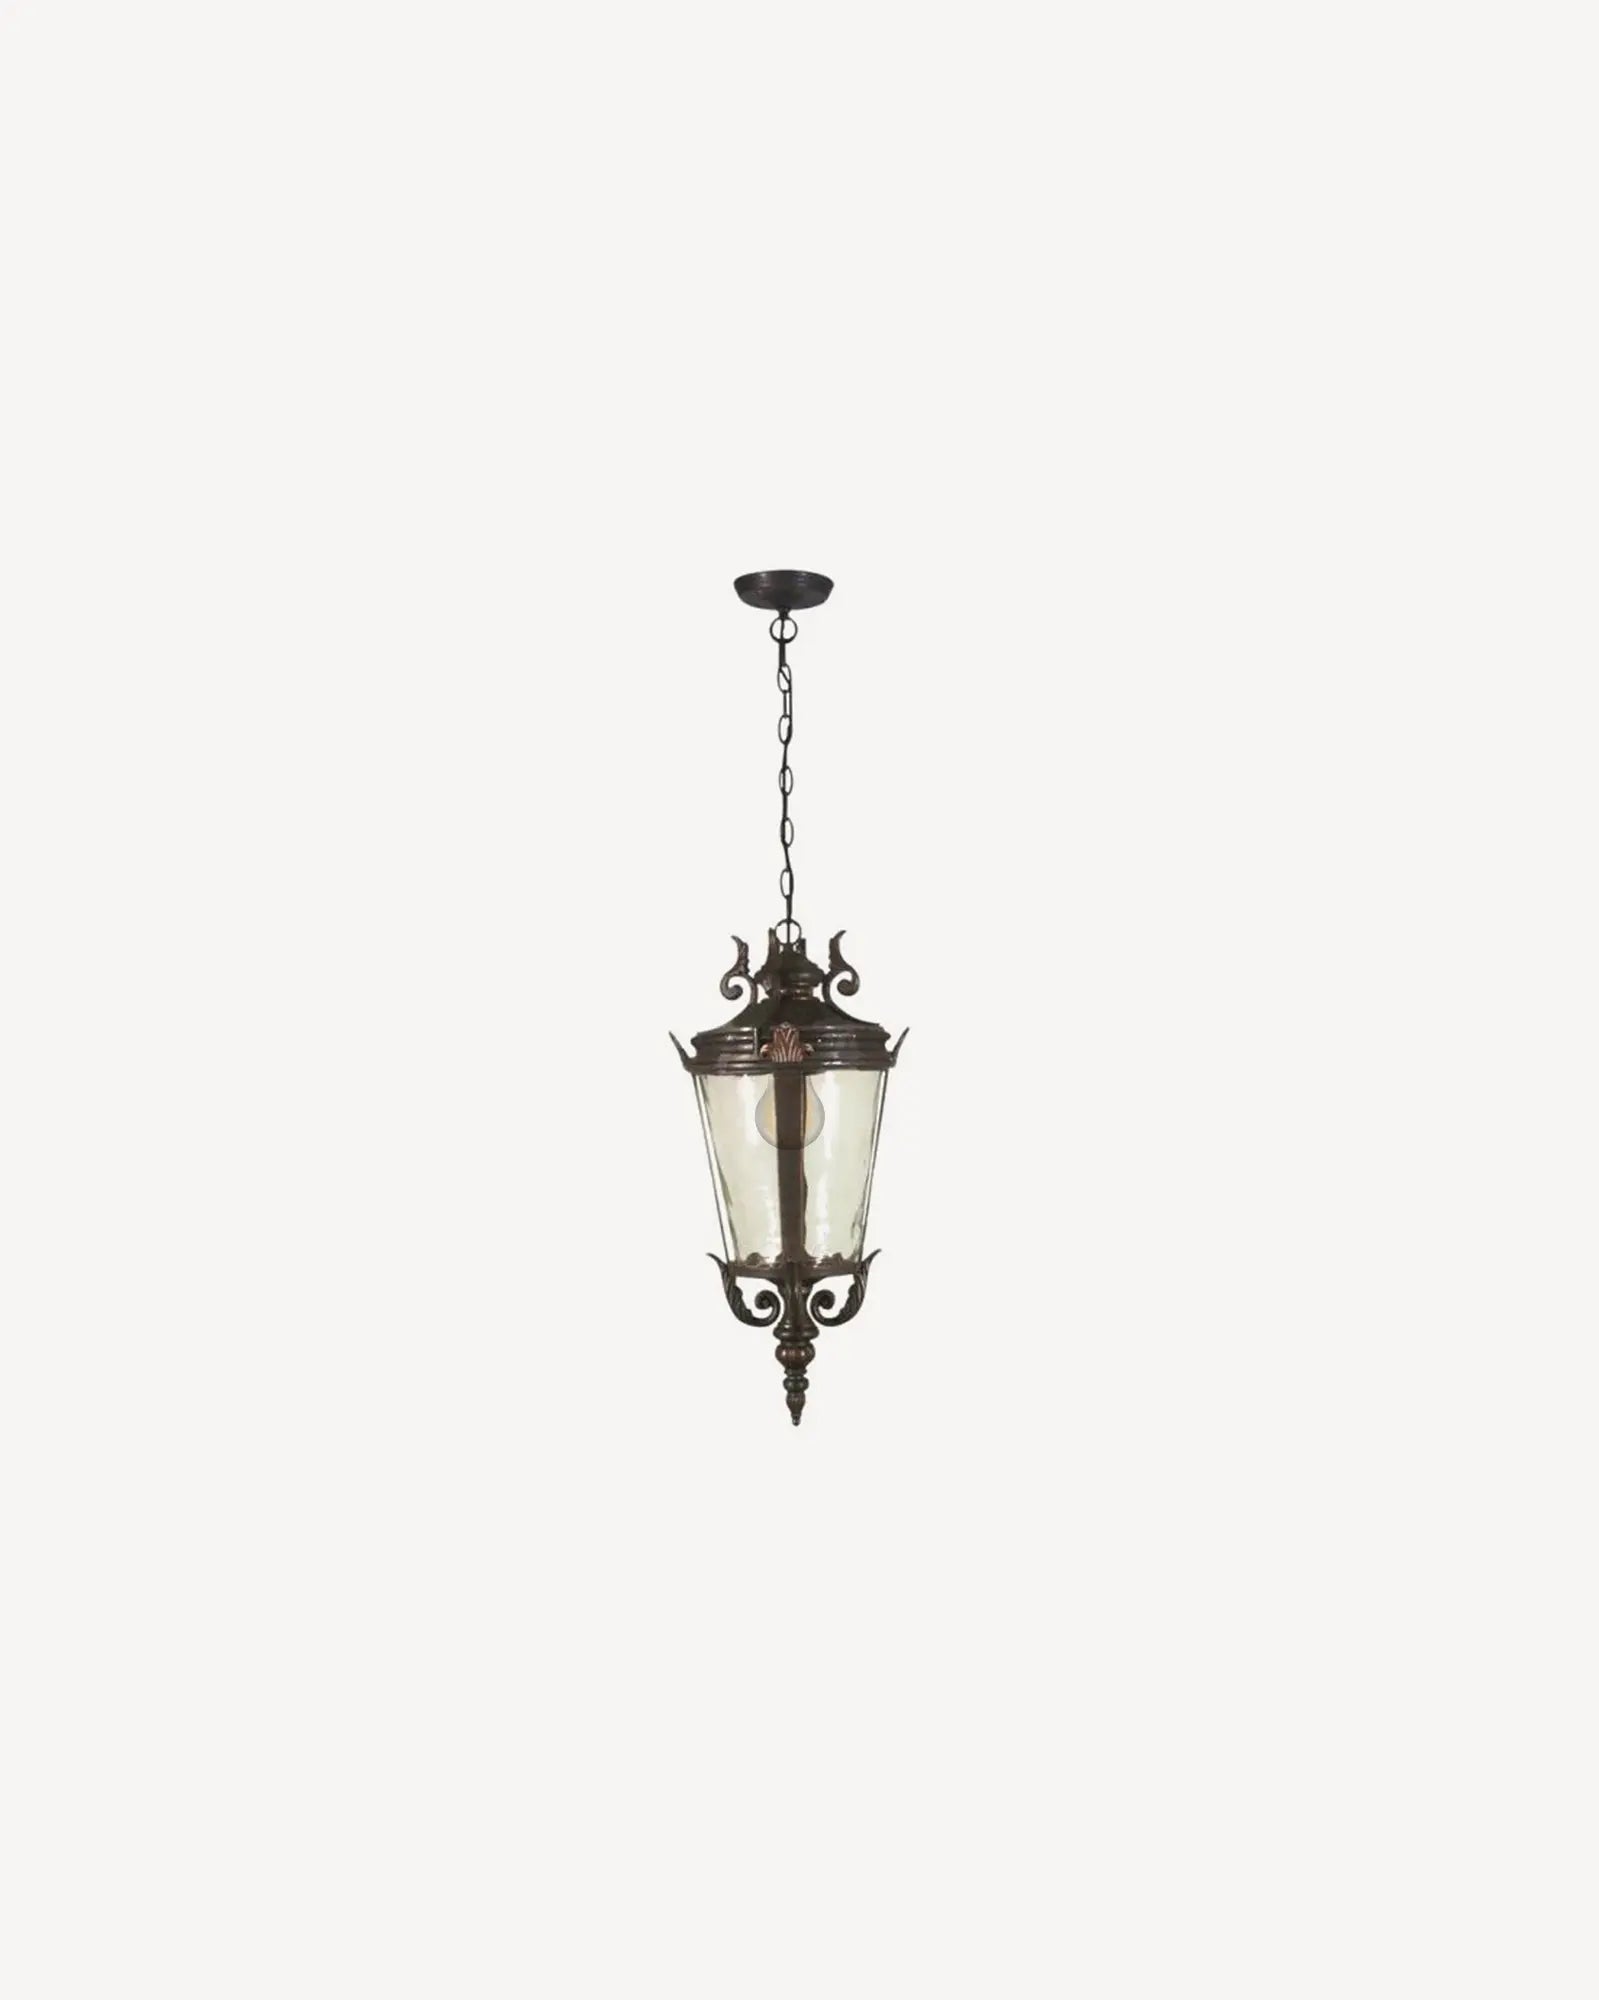 Albany chain pendant light by Inspiration Light at Nook Collections